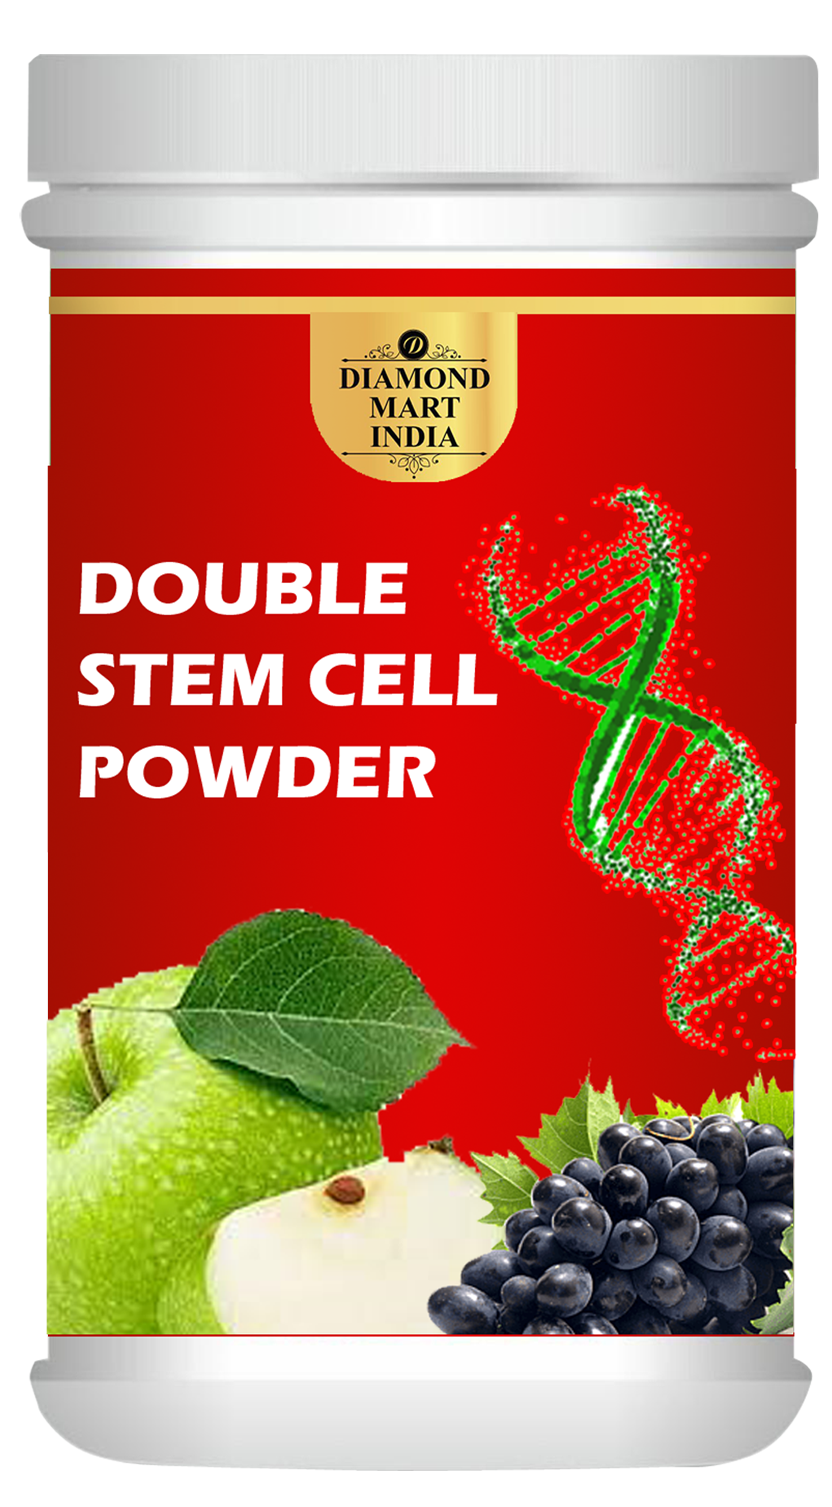 DOUBLE STEMCELL